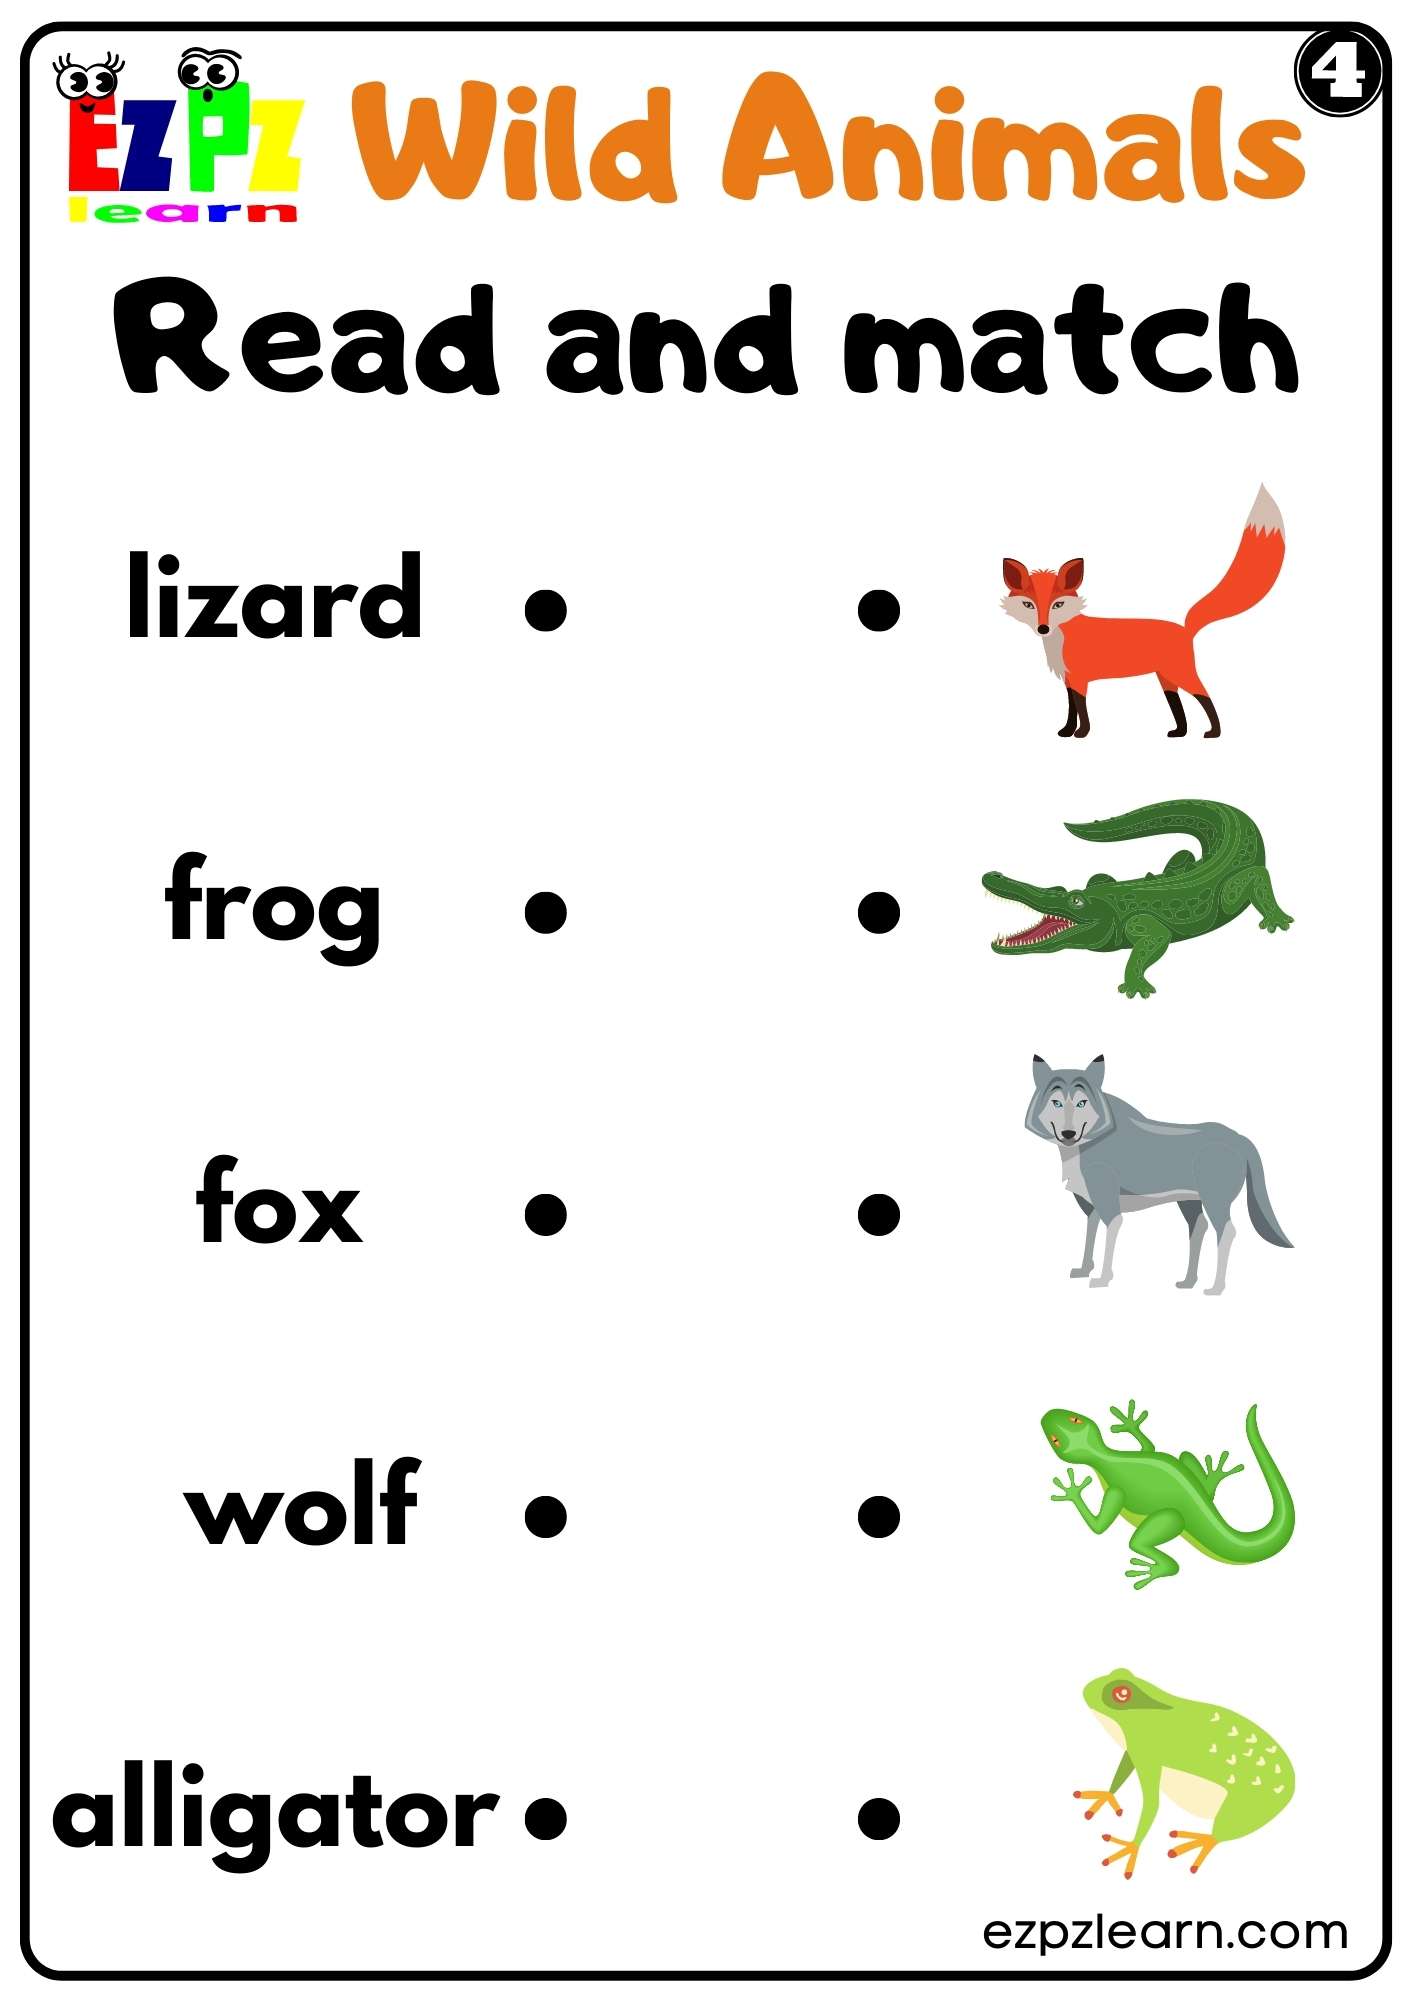 Wild Animals Read and Match Worksheet for Kids and ESL PDF Download Set 4 -  